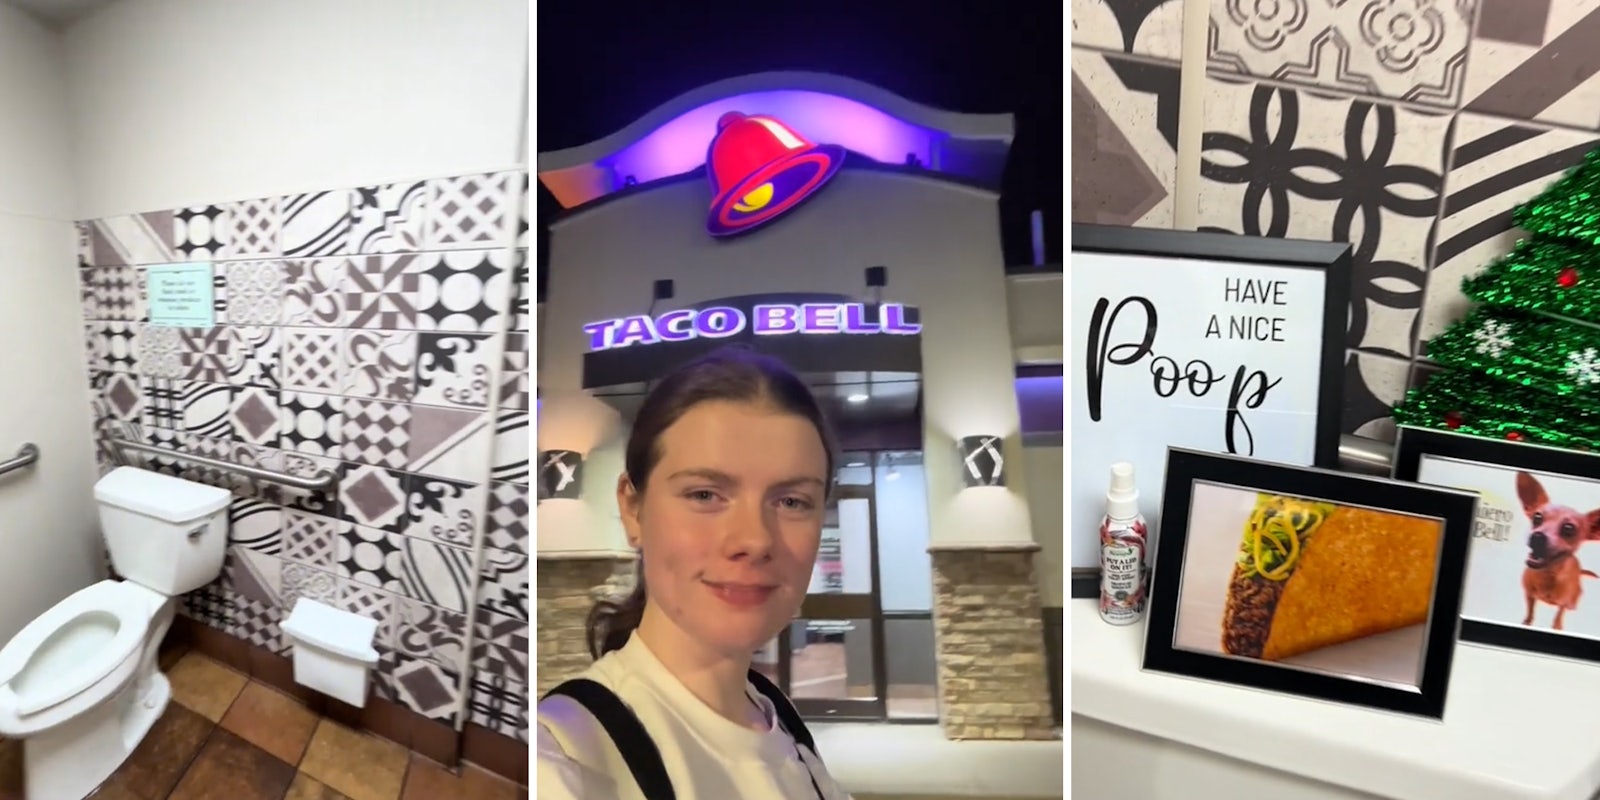 Woman kicked out of Taco Bell for cleaning, decorating the bathroom